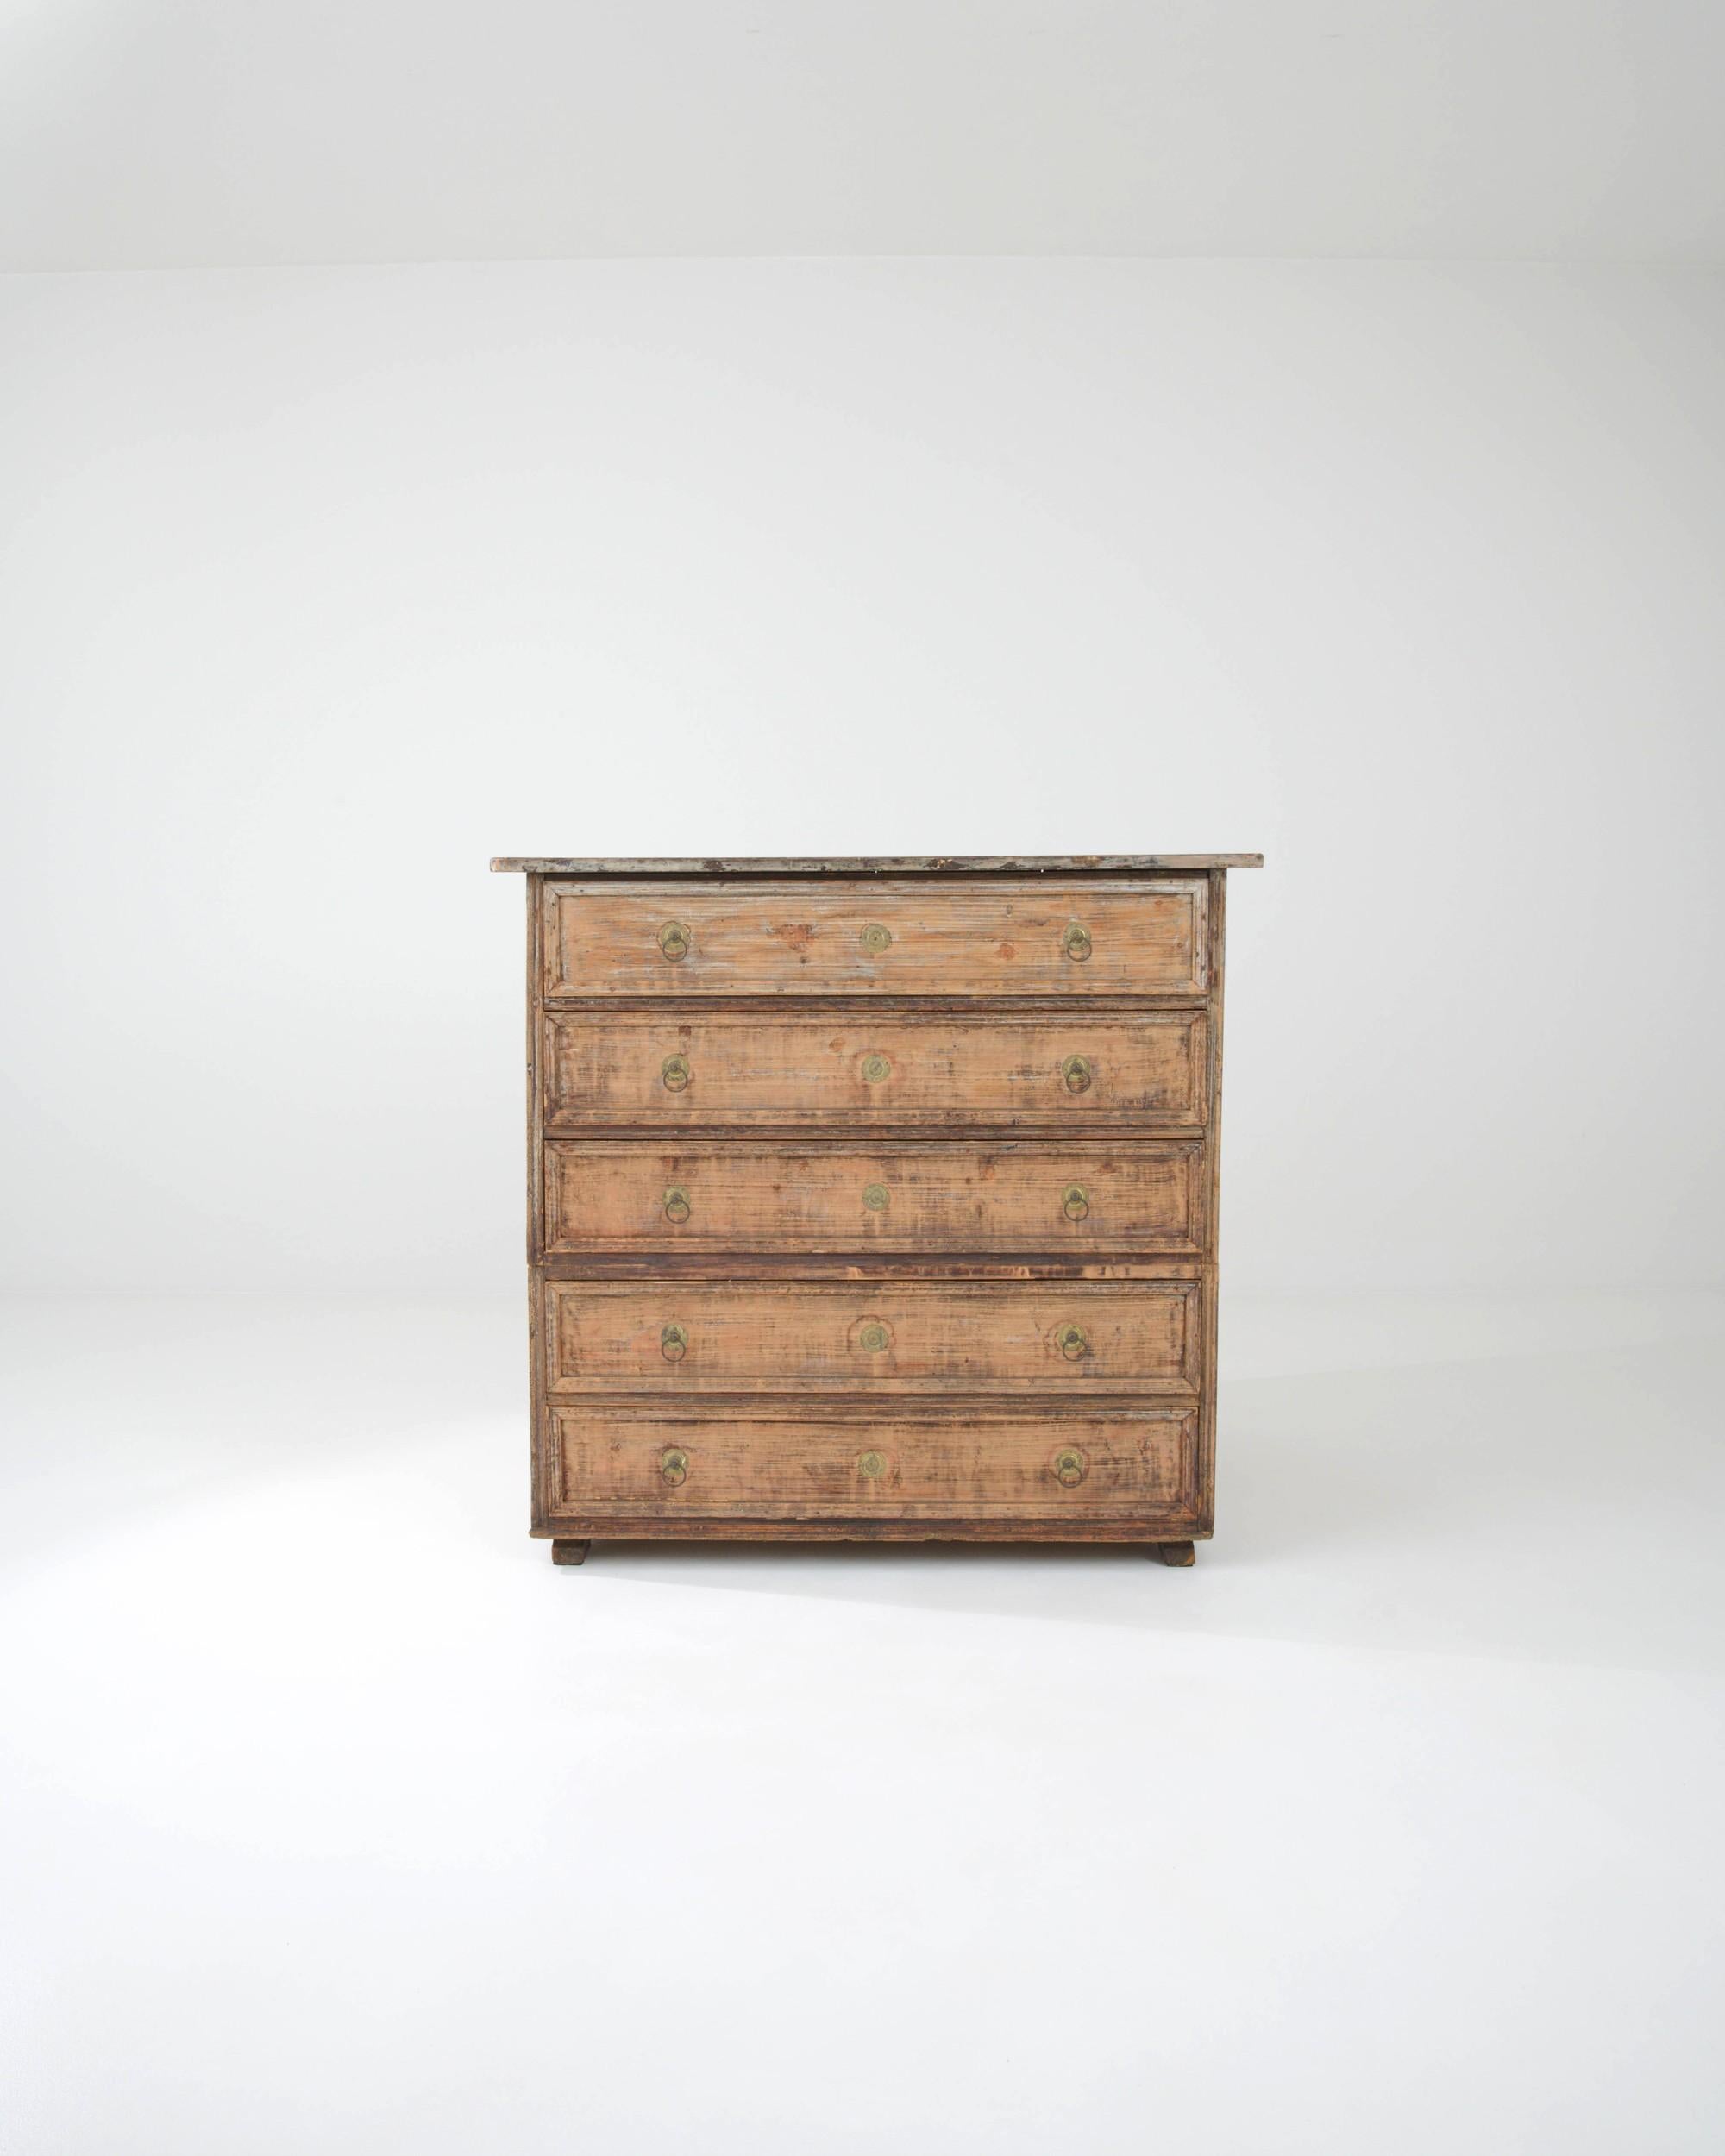 A nostalgic patina gives this antique wooden chest of drawers a romantic charm. Hand-made in France in the 1800s, the design has an elegant Neoclassical character. Simple, clean lines and discreet paneling evoke an air of refinement. The drawers are